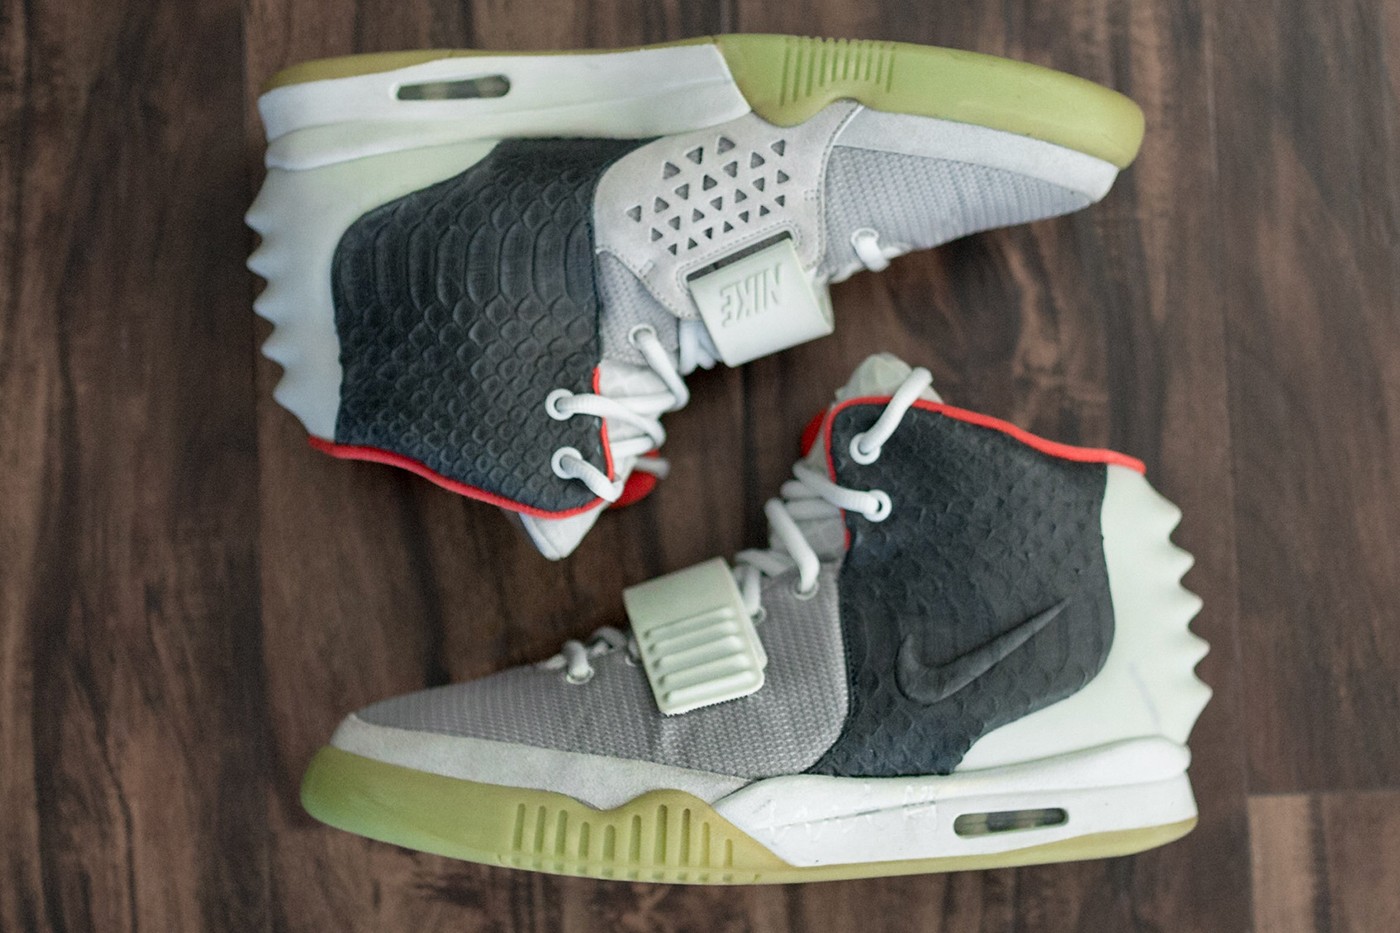 The Nike Air Yeezy II is displayed at The Good Will Out sneaker store in  Cologne, Germany, 08 June 2012. American rapper Kayne West developed the  sneaker with Nike. People have been